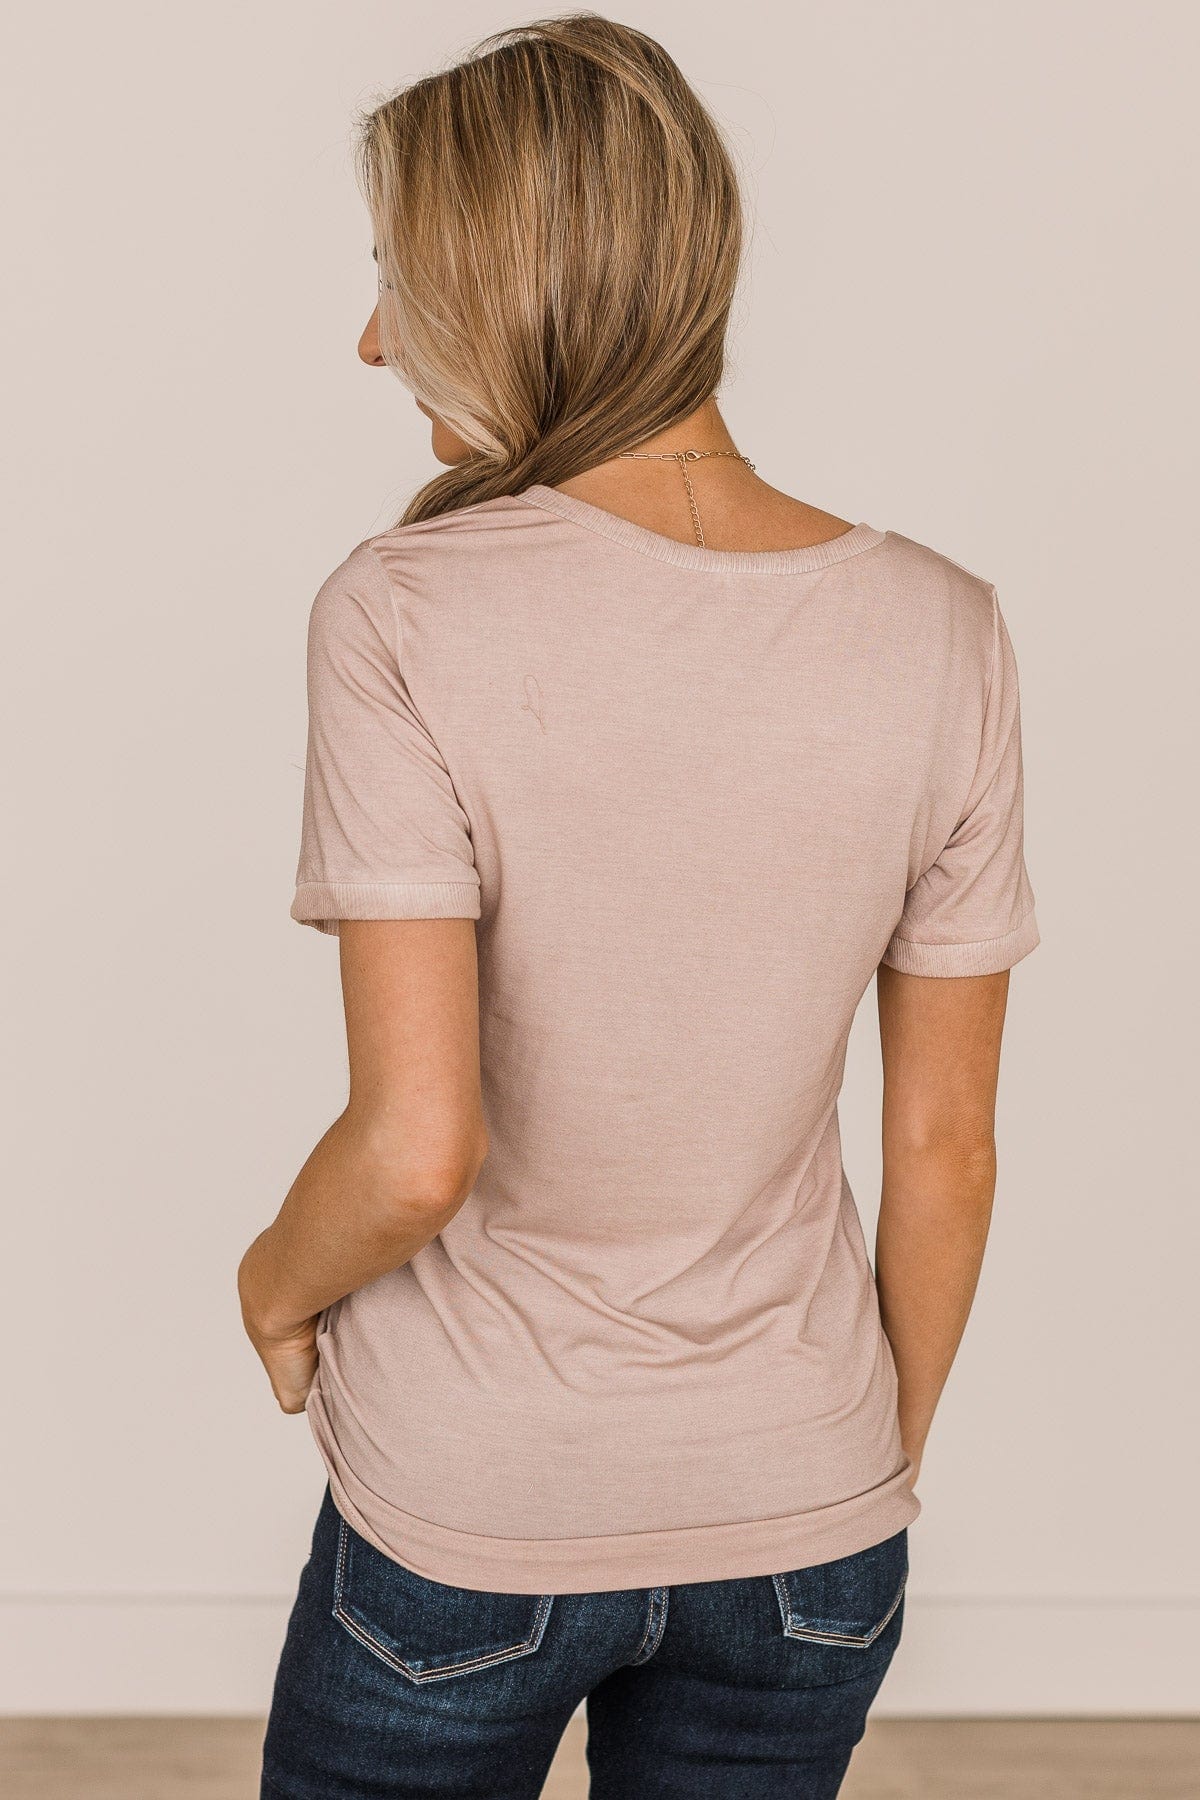 Unconditional Love Pocket Top- Dusty Pink